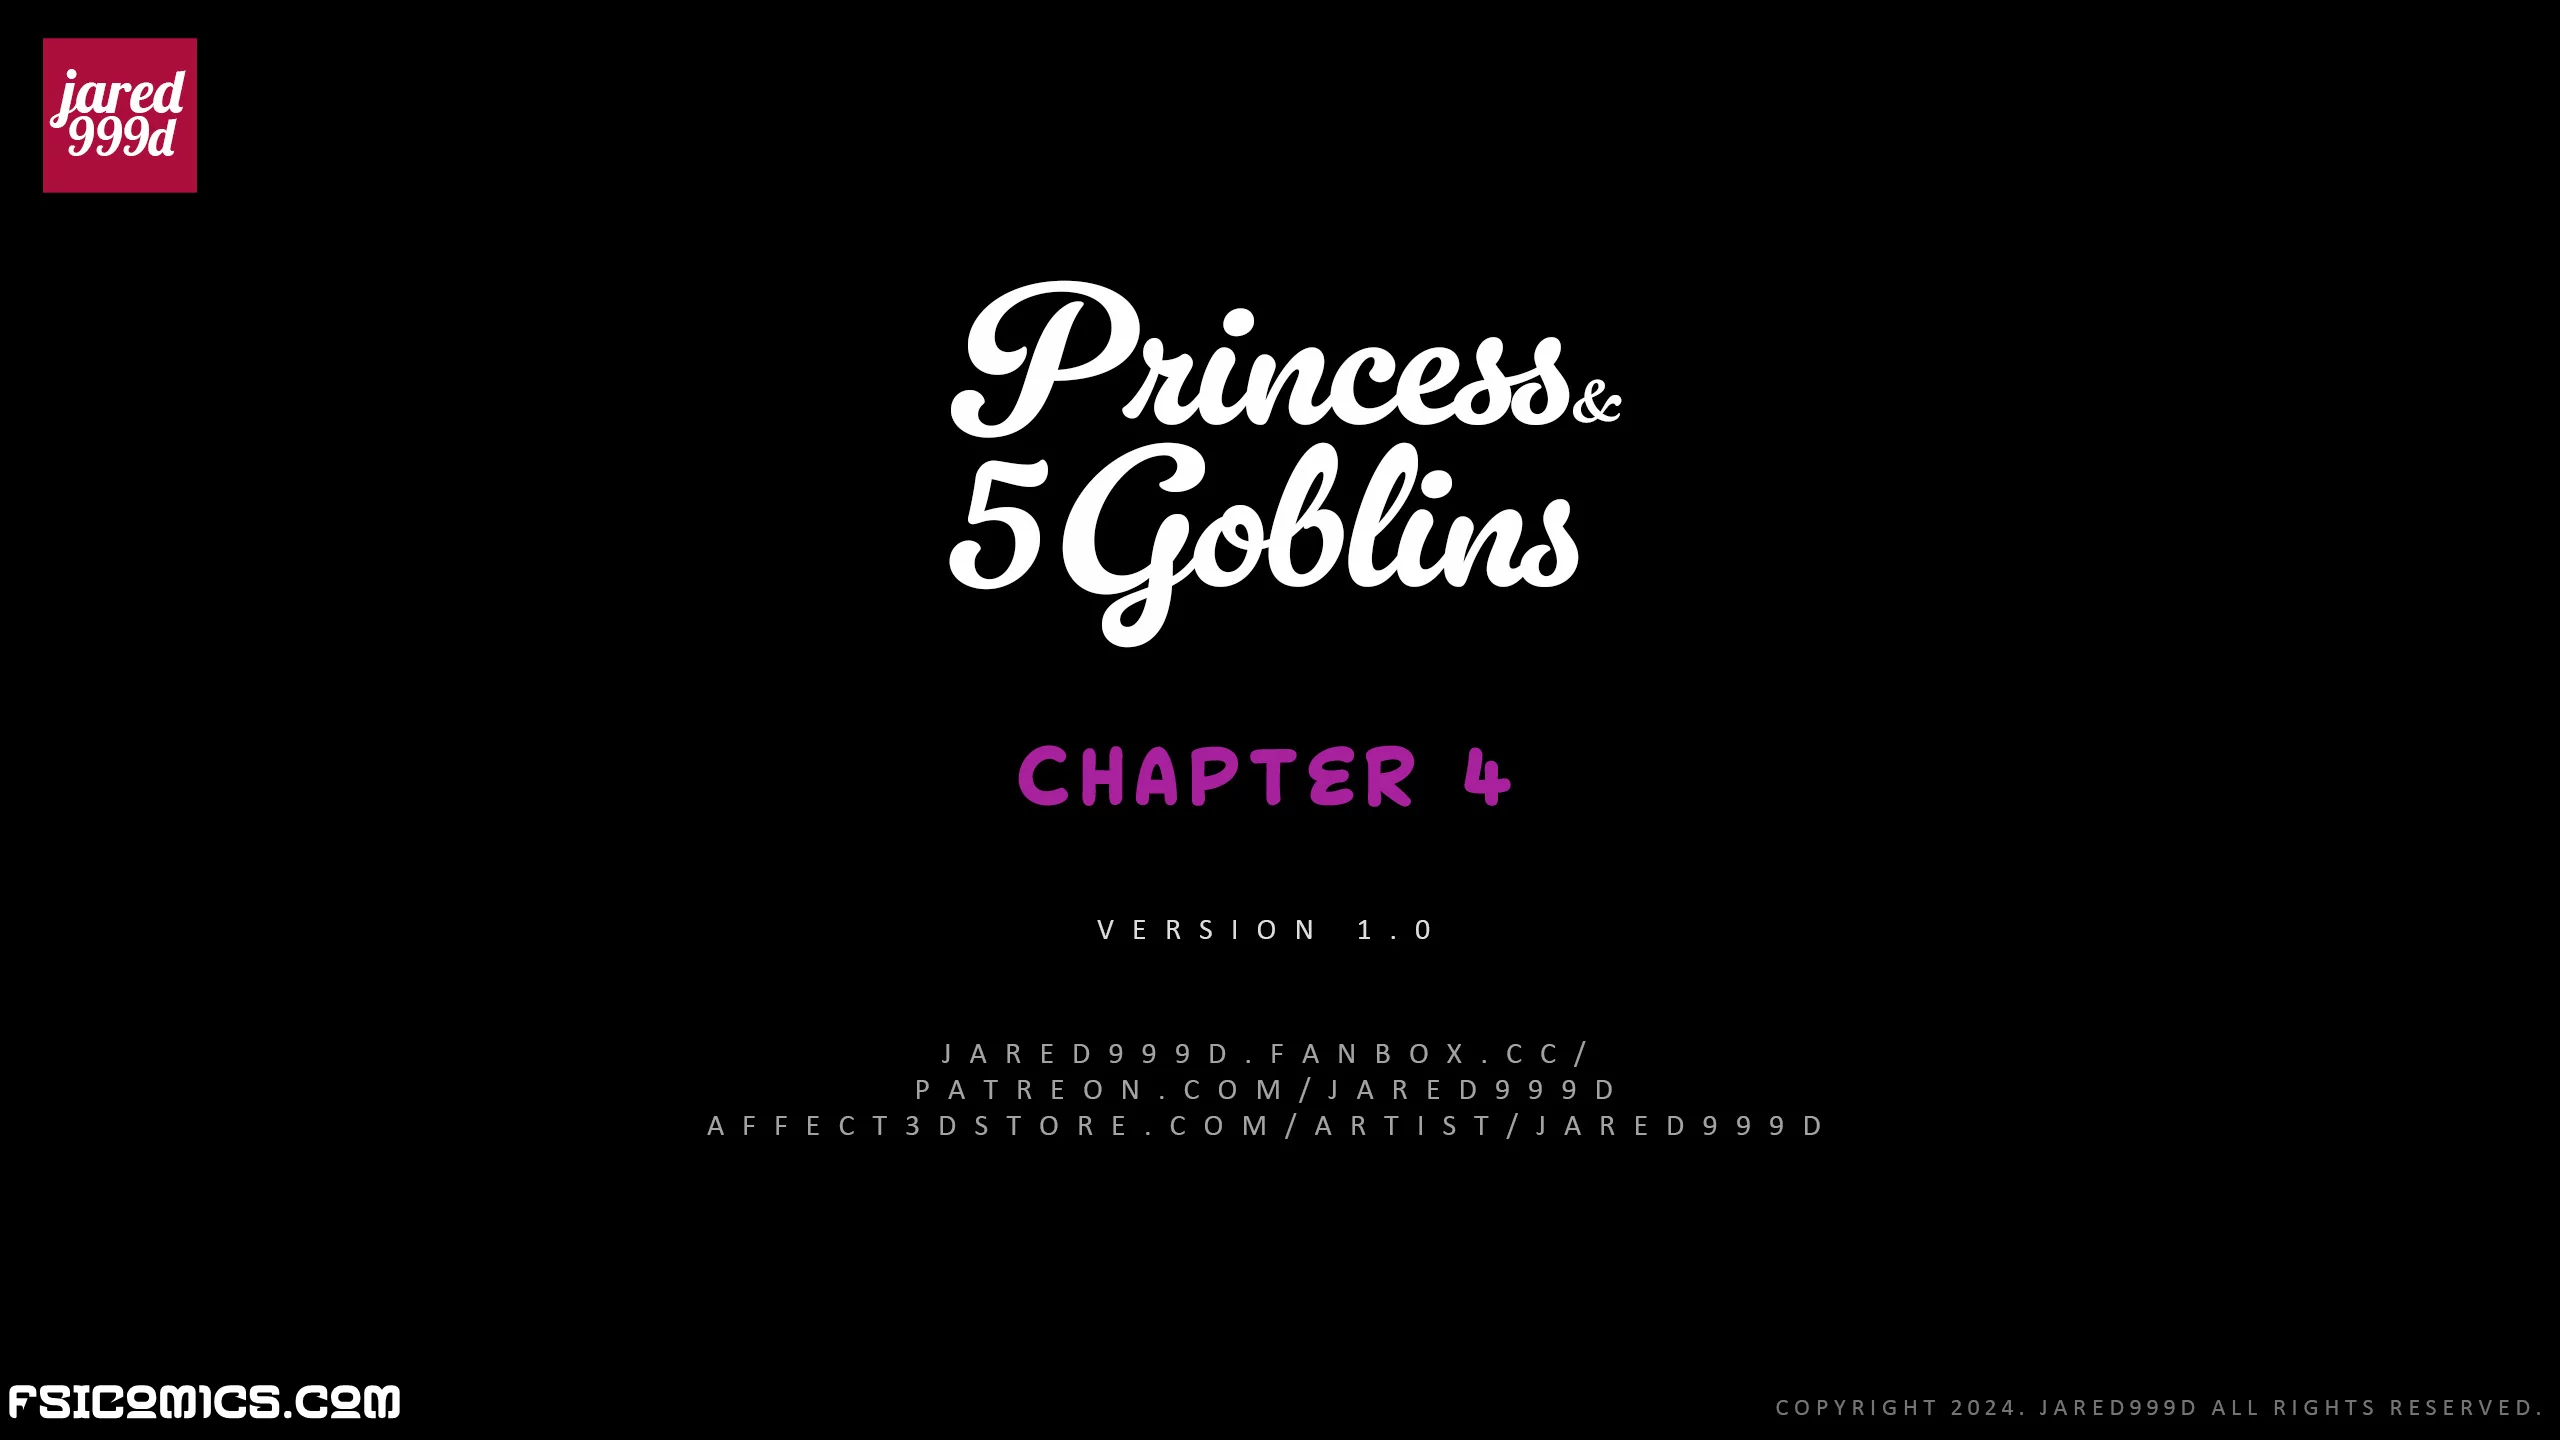 Princess And 5 Goblins Chapter 4 - Jared999D - 43 - FSIComics